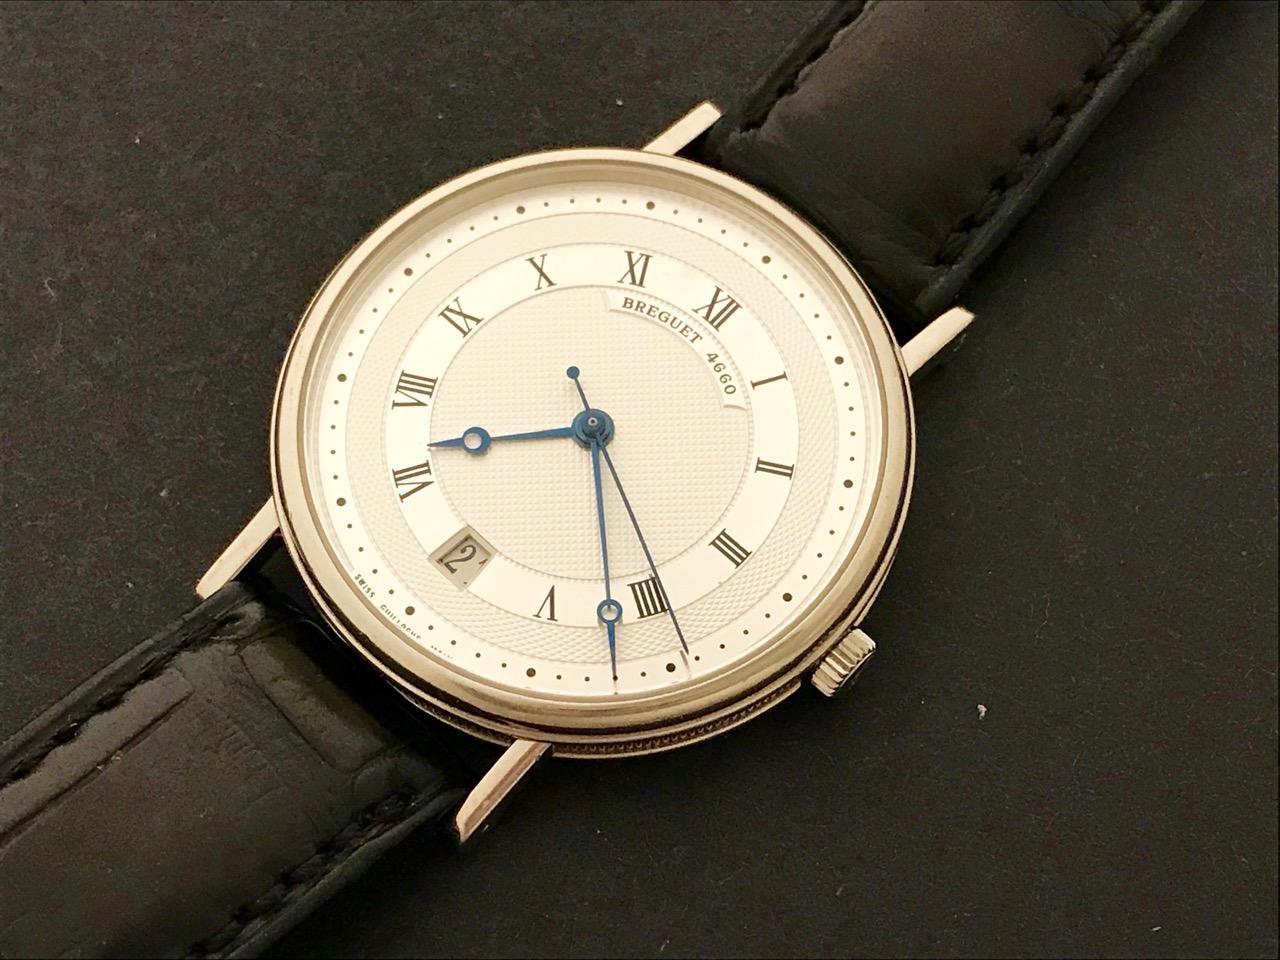 Breguet Classique White Gold Automatic Wristwatch In Excellent Condition For Sale In Dallas, TX